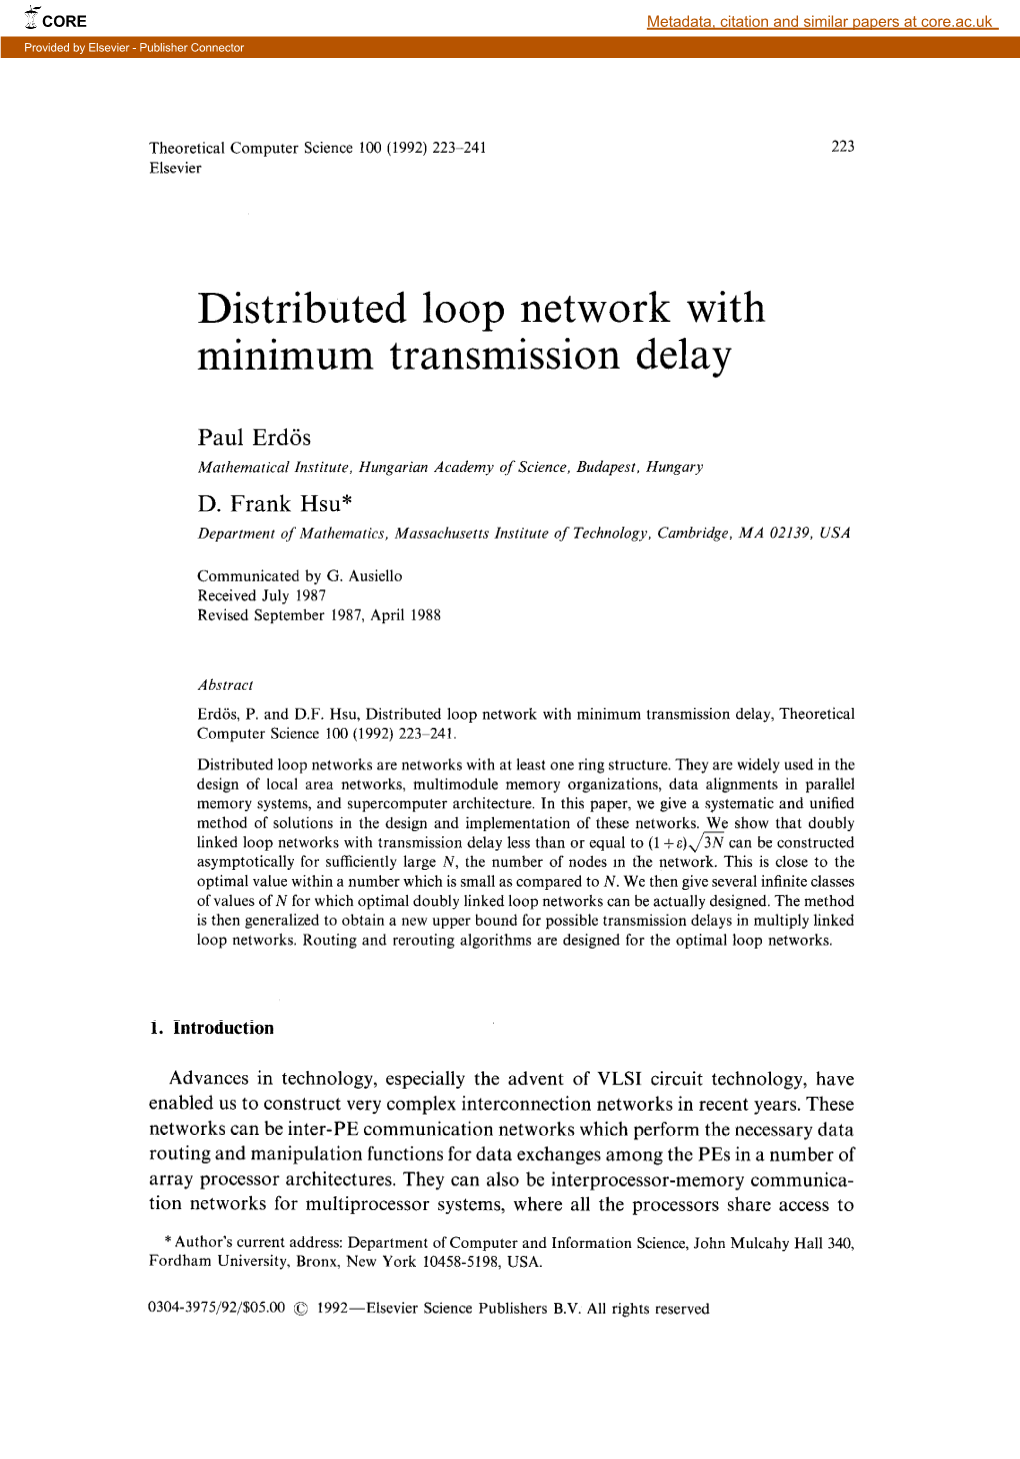 Distributed Loop Network with Minimum Transmission Delay